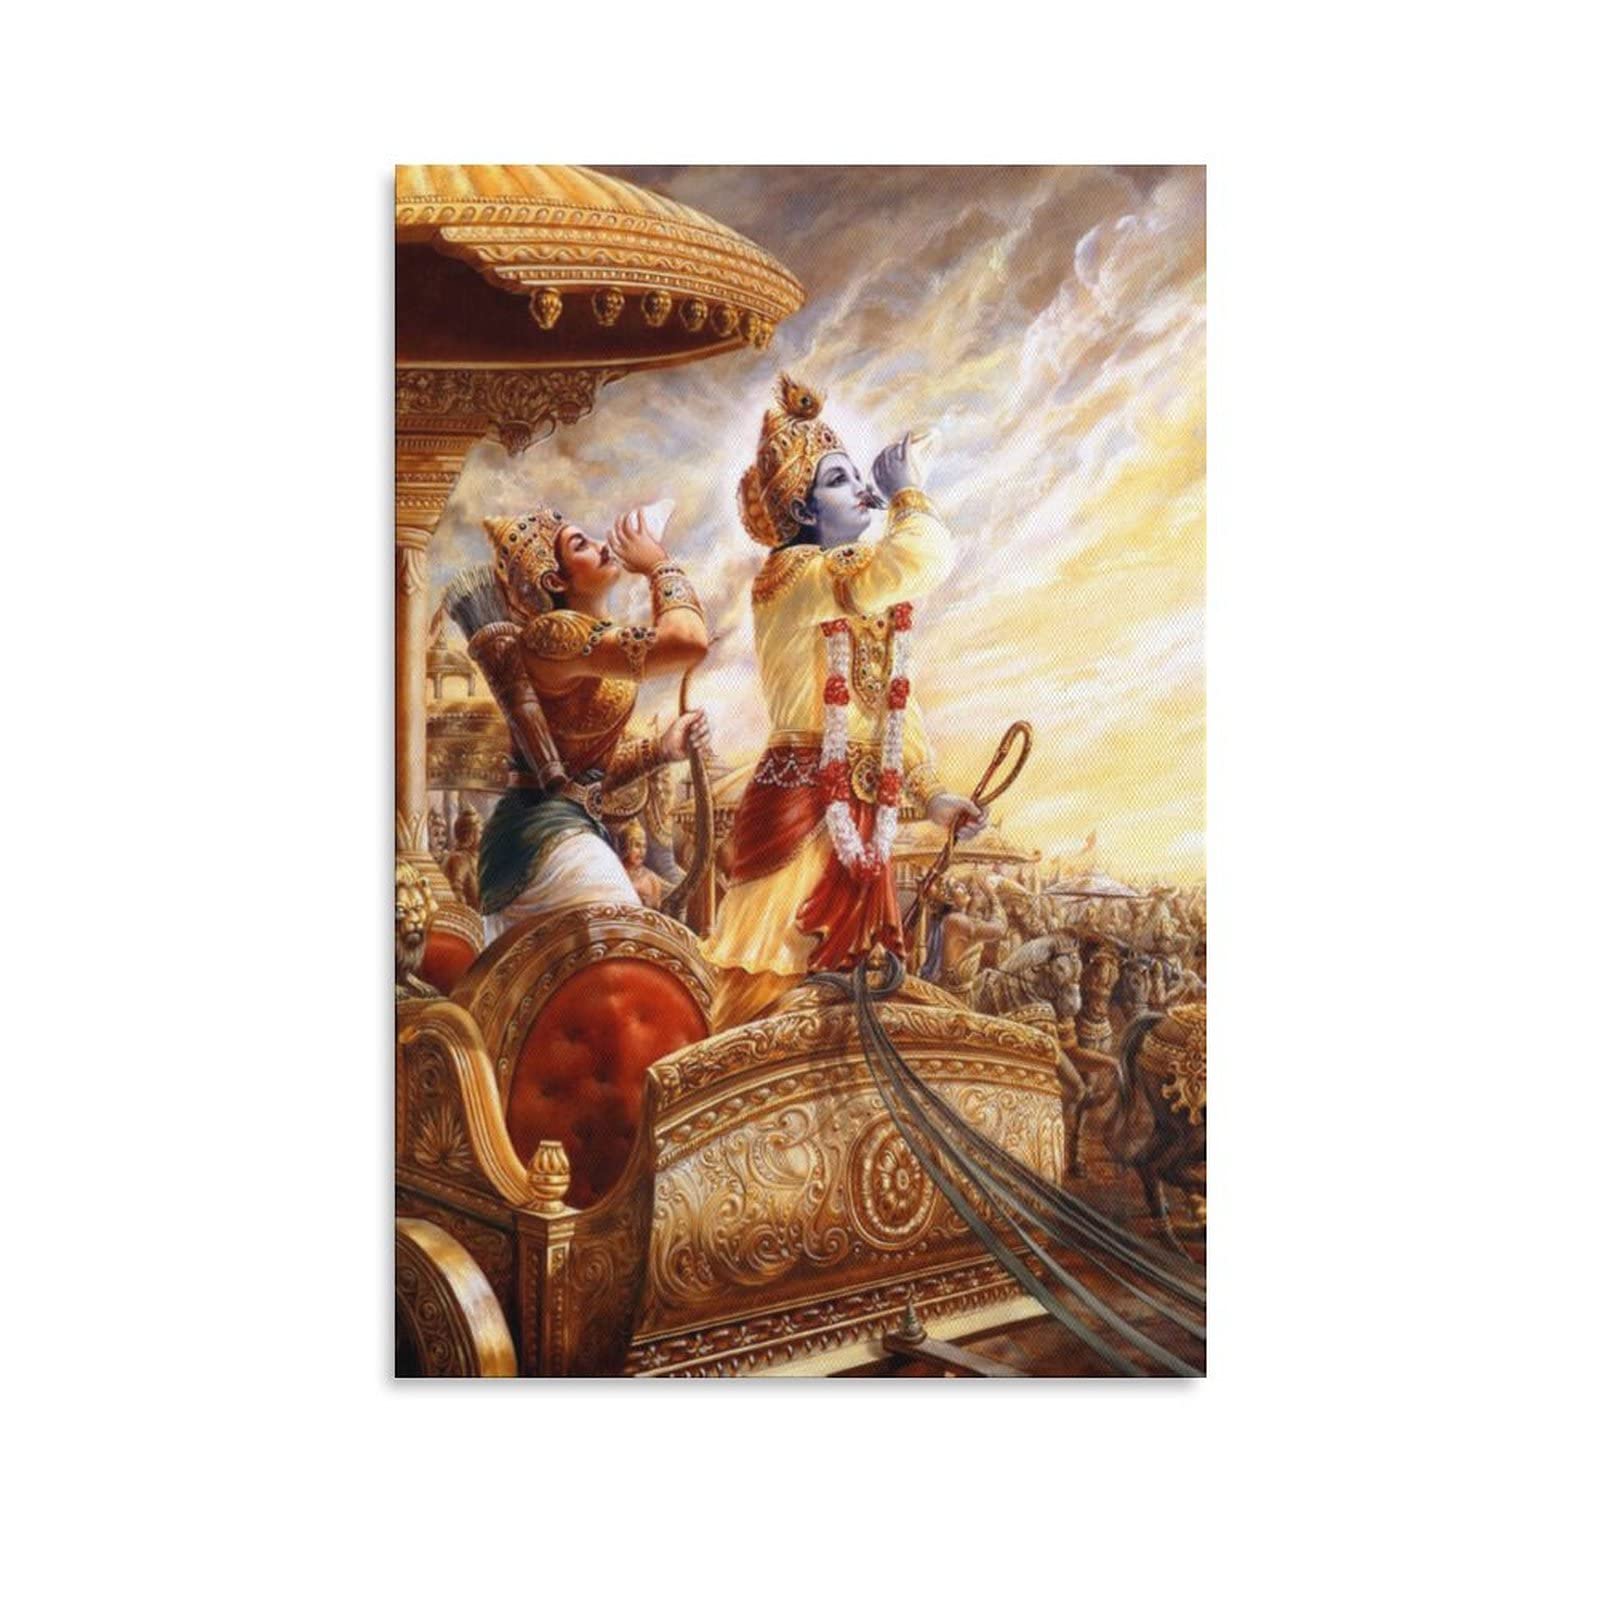 Lord Krishna Arjuna Mahabharata Battle Field Canvas Poster Bedroom Decor Sports Landscape Office Room Decor Gift, Canvas Poster Wall Art Decor Print Picture Paintings for Living Room Bedroom Decoration: Posters & Prints